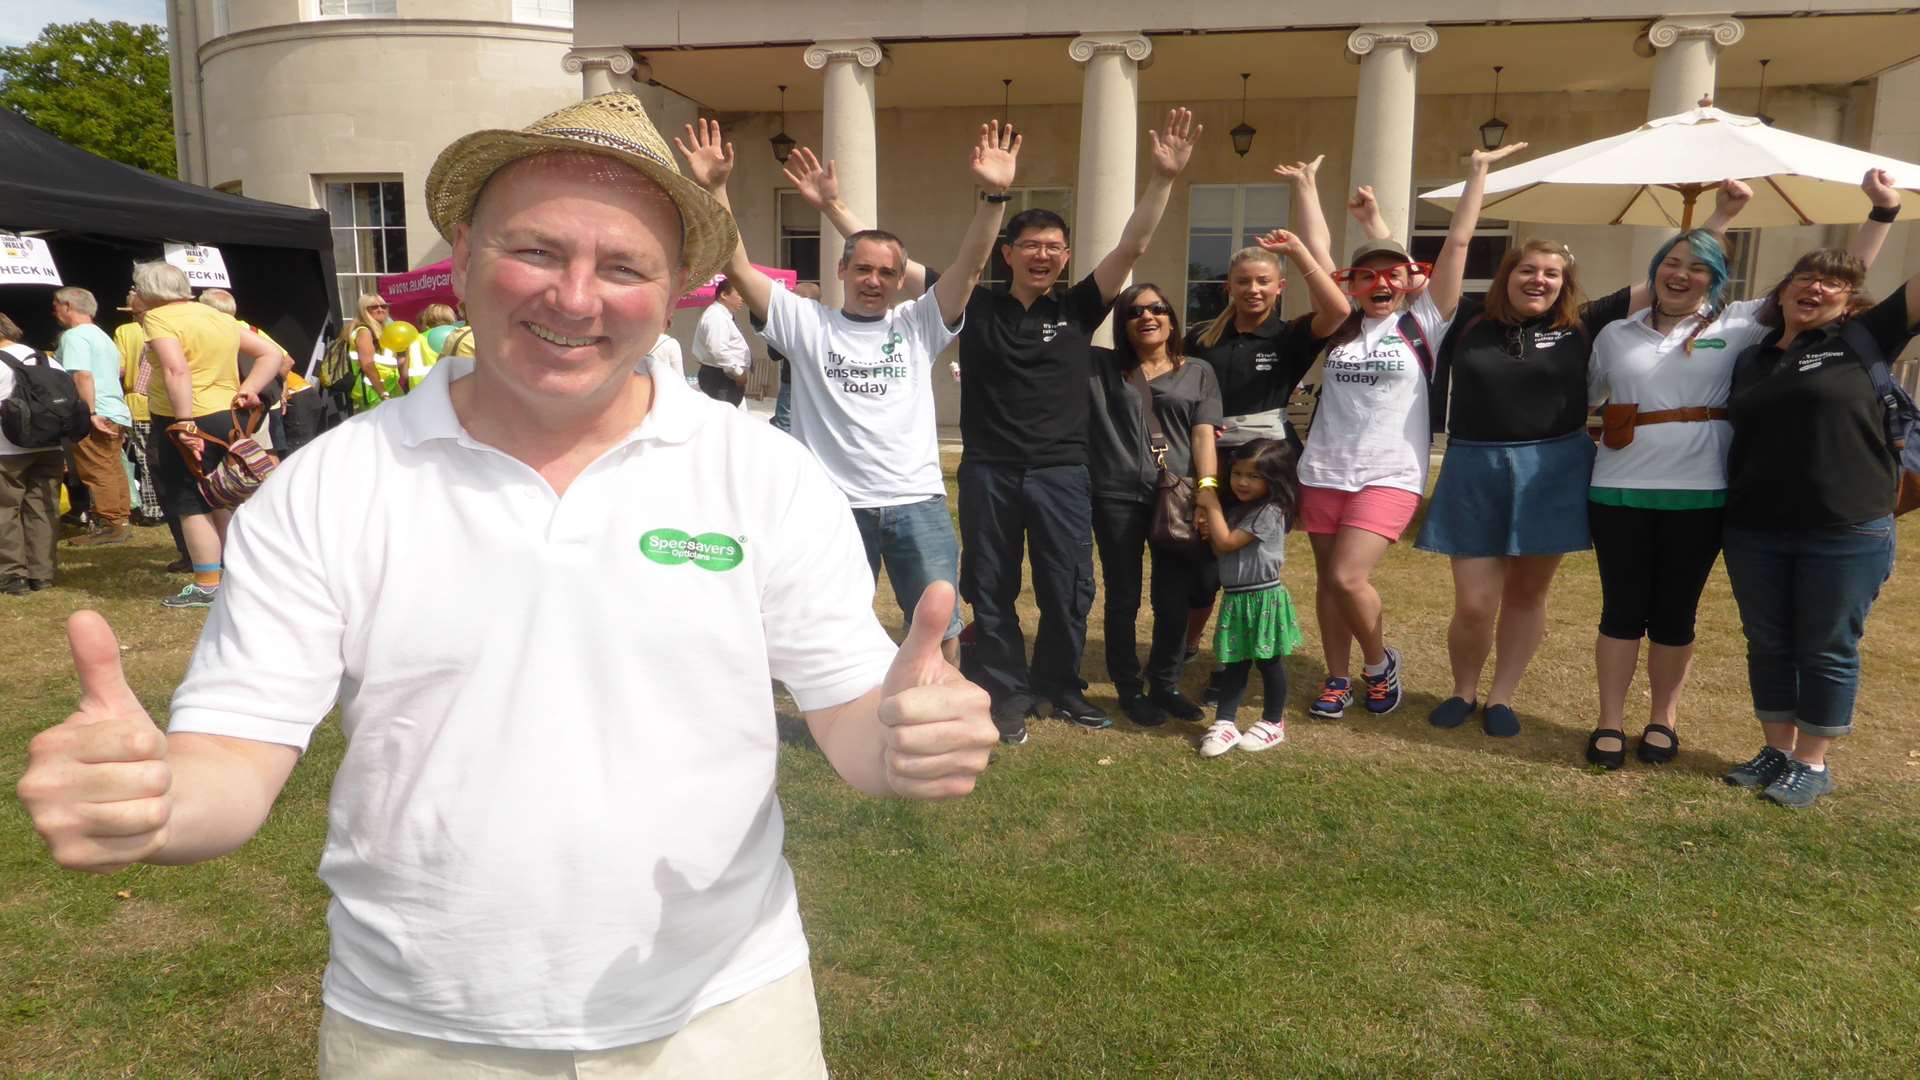 David Bryant, Specsavers director for the Margate and Ramsgate branches, joins staff for the big walk.